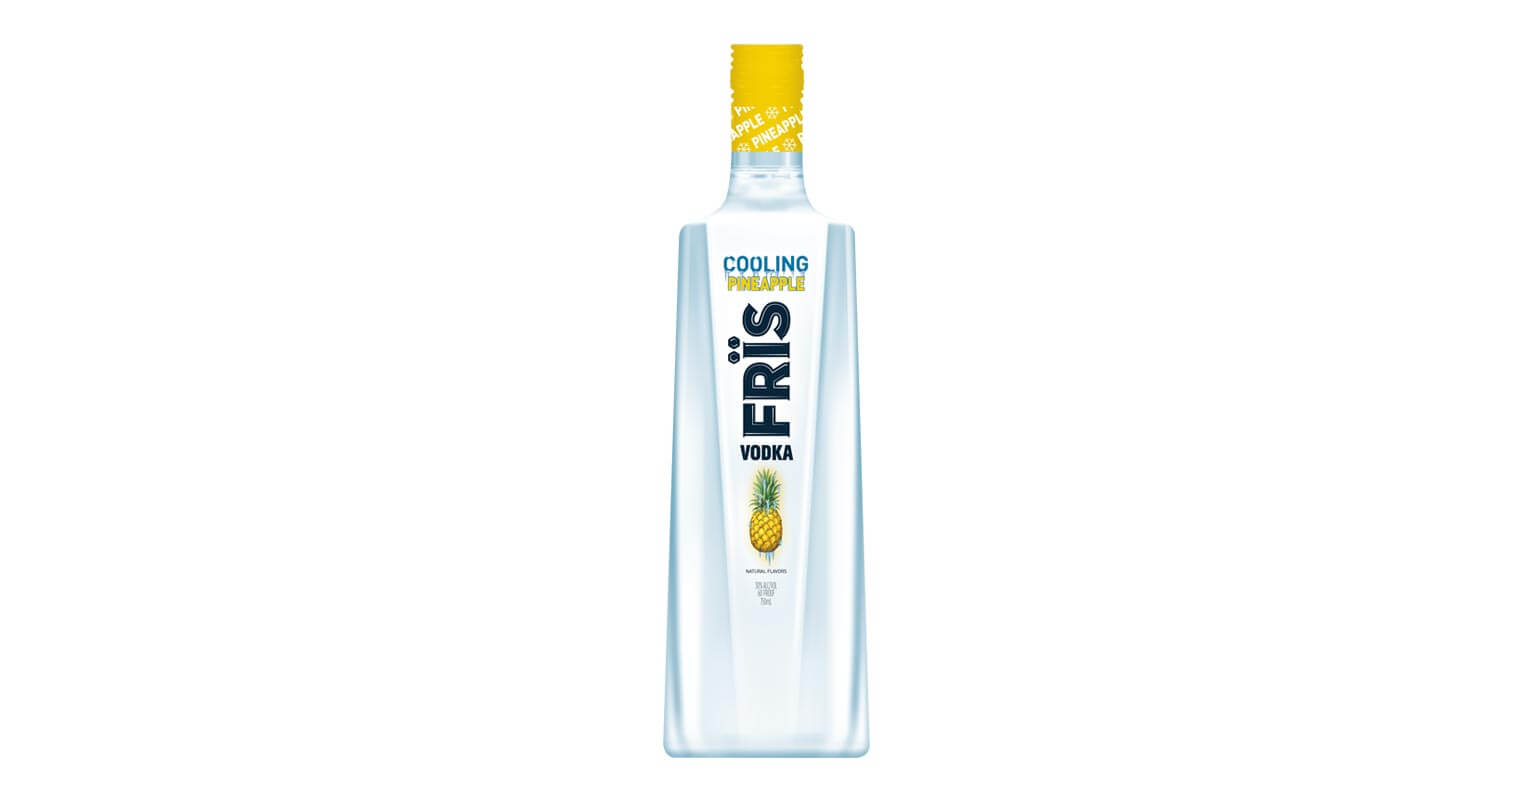 FrÏs Launches Pineapple Flavored Vodka, featured brands, featured image